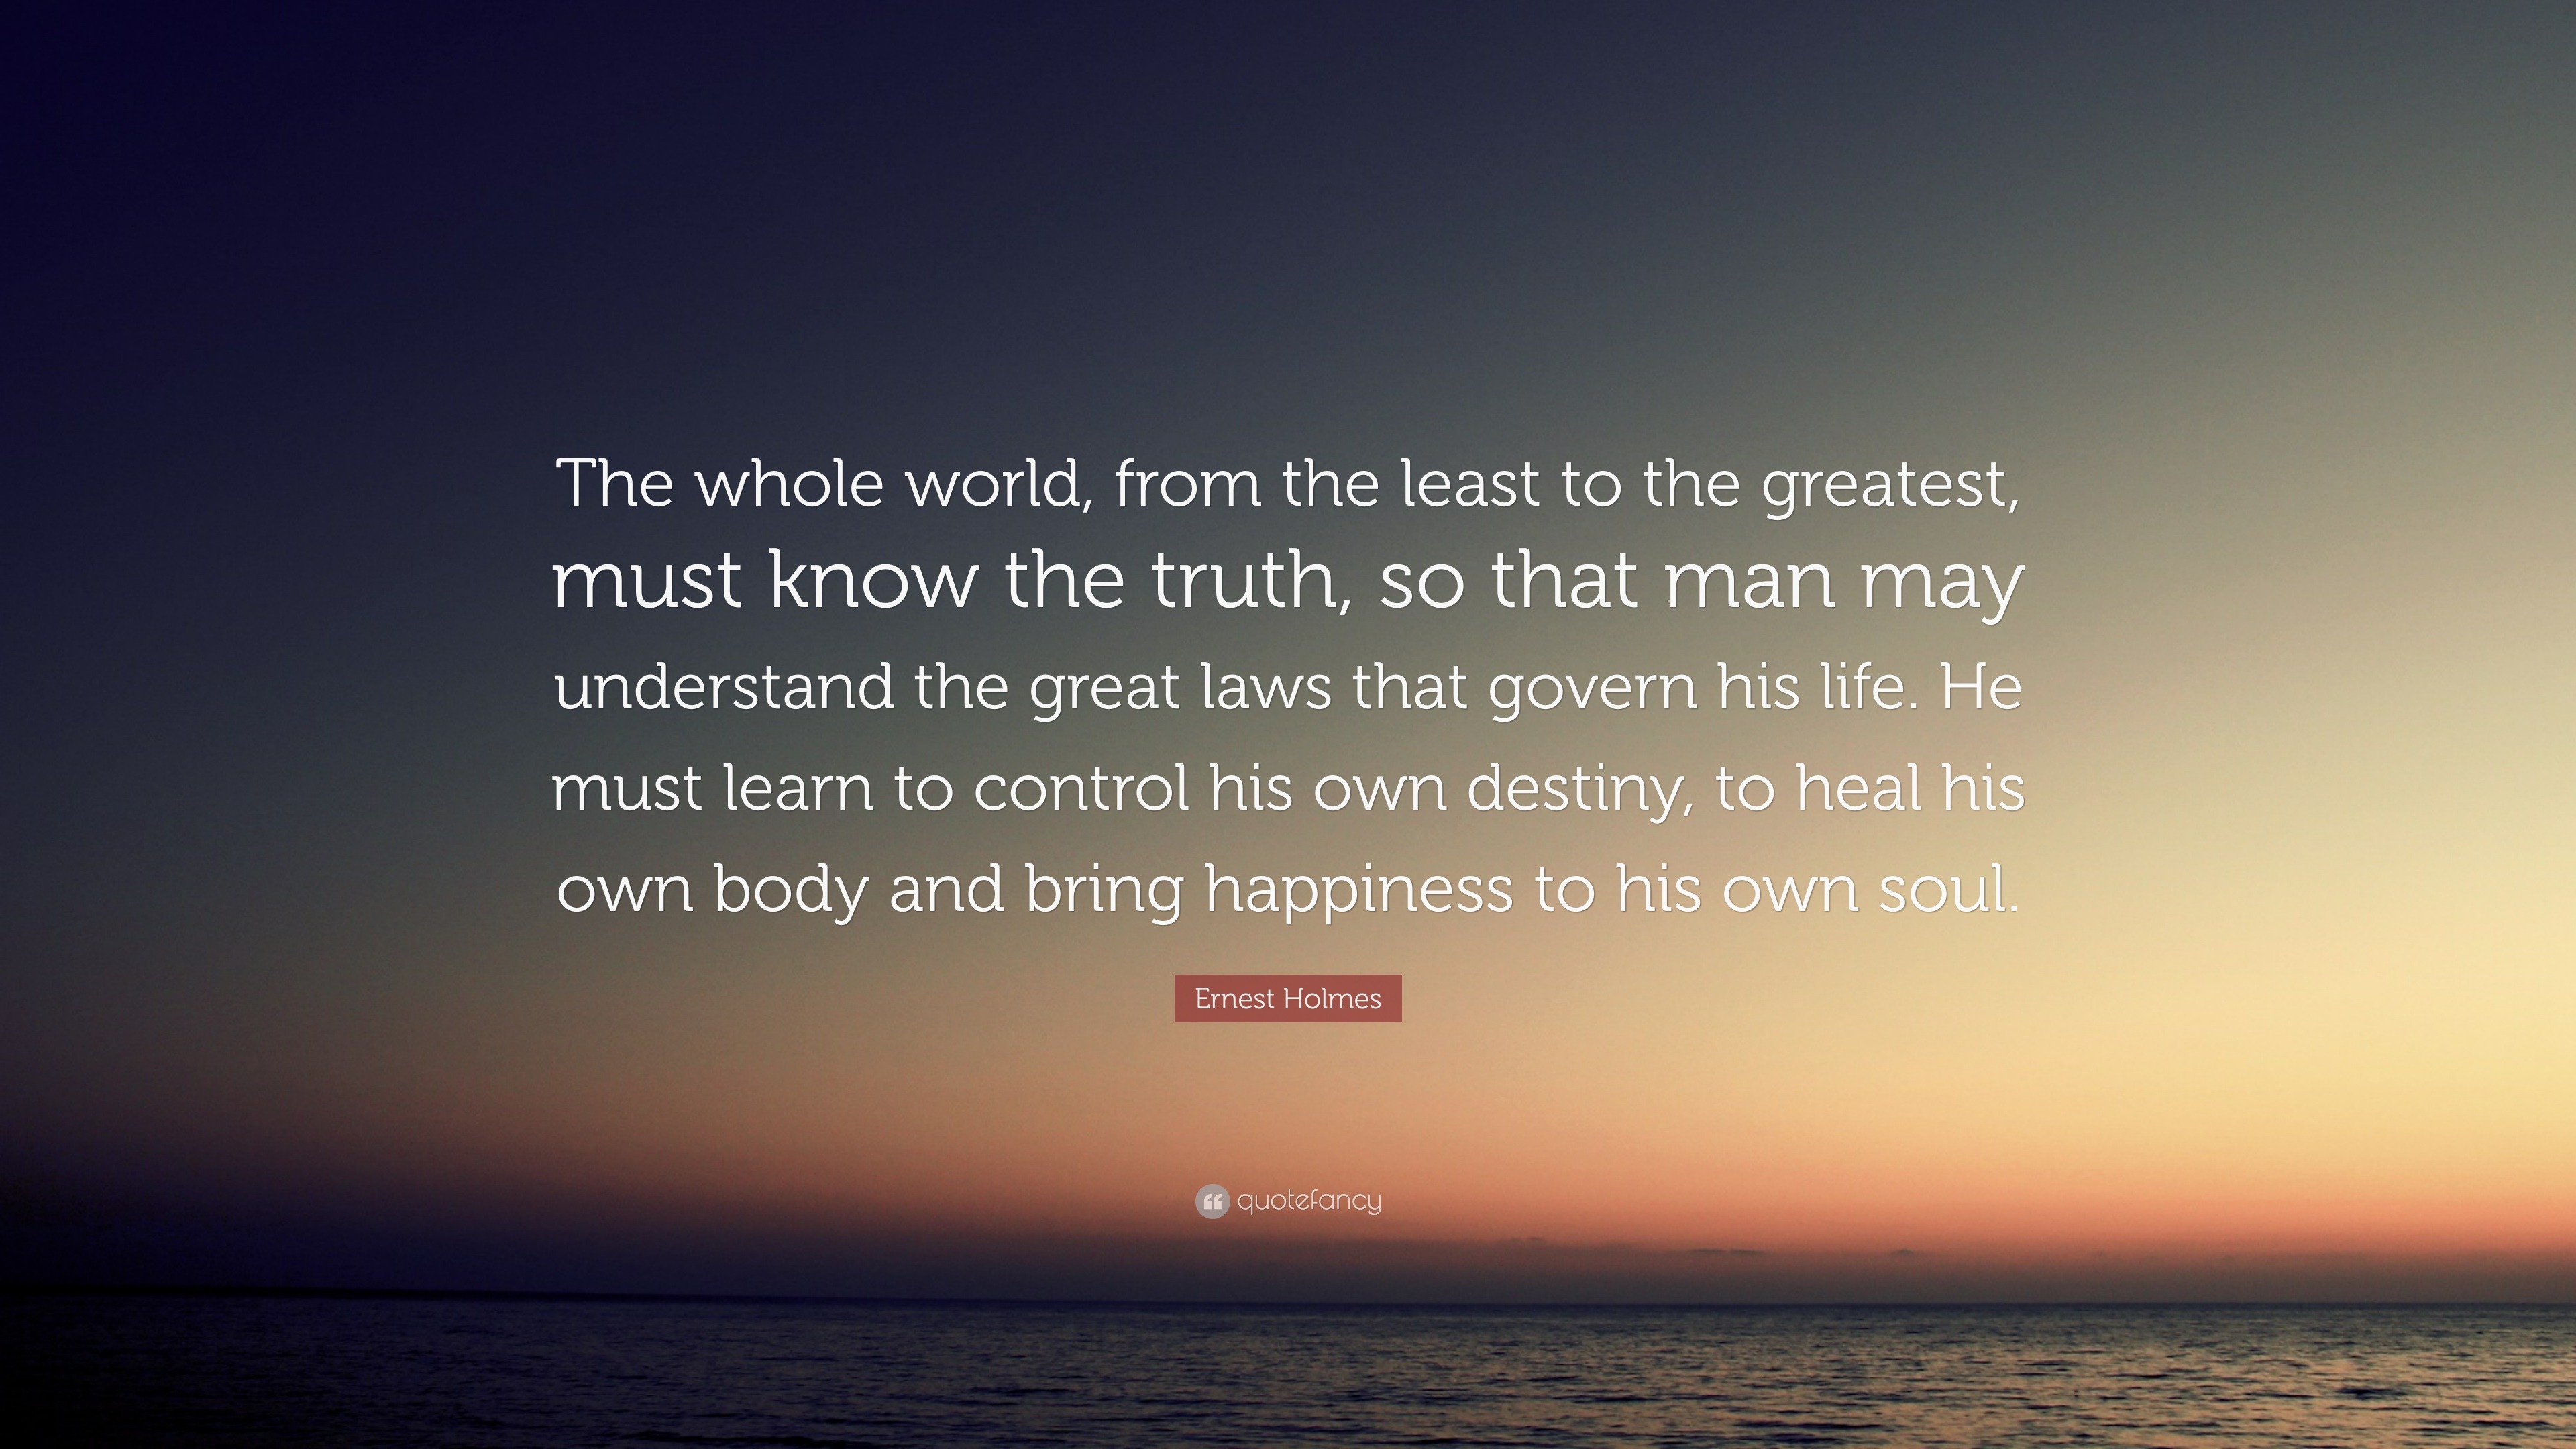 Ernest Holmes Quote: “The whole world, from the least to the greatest ...